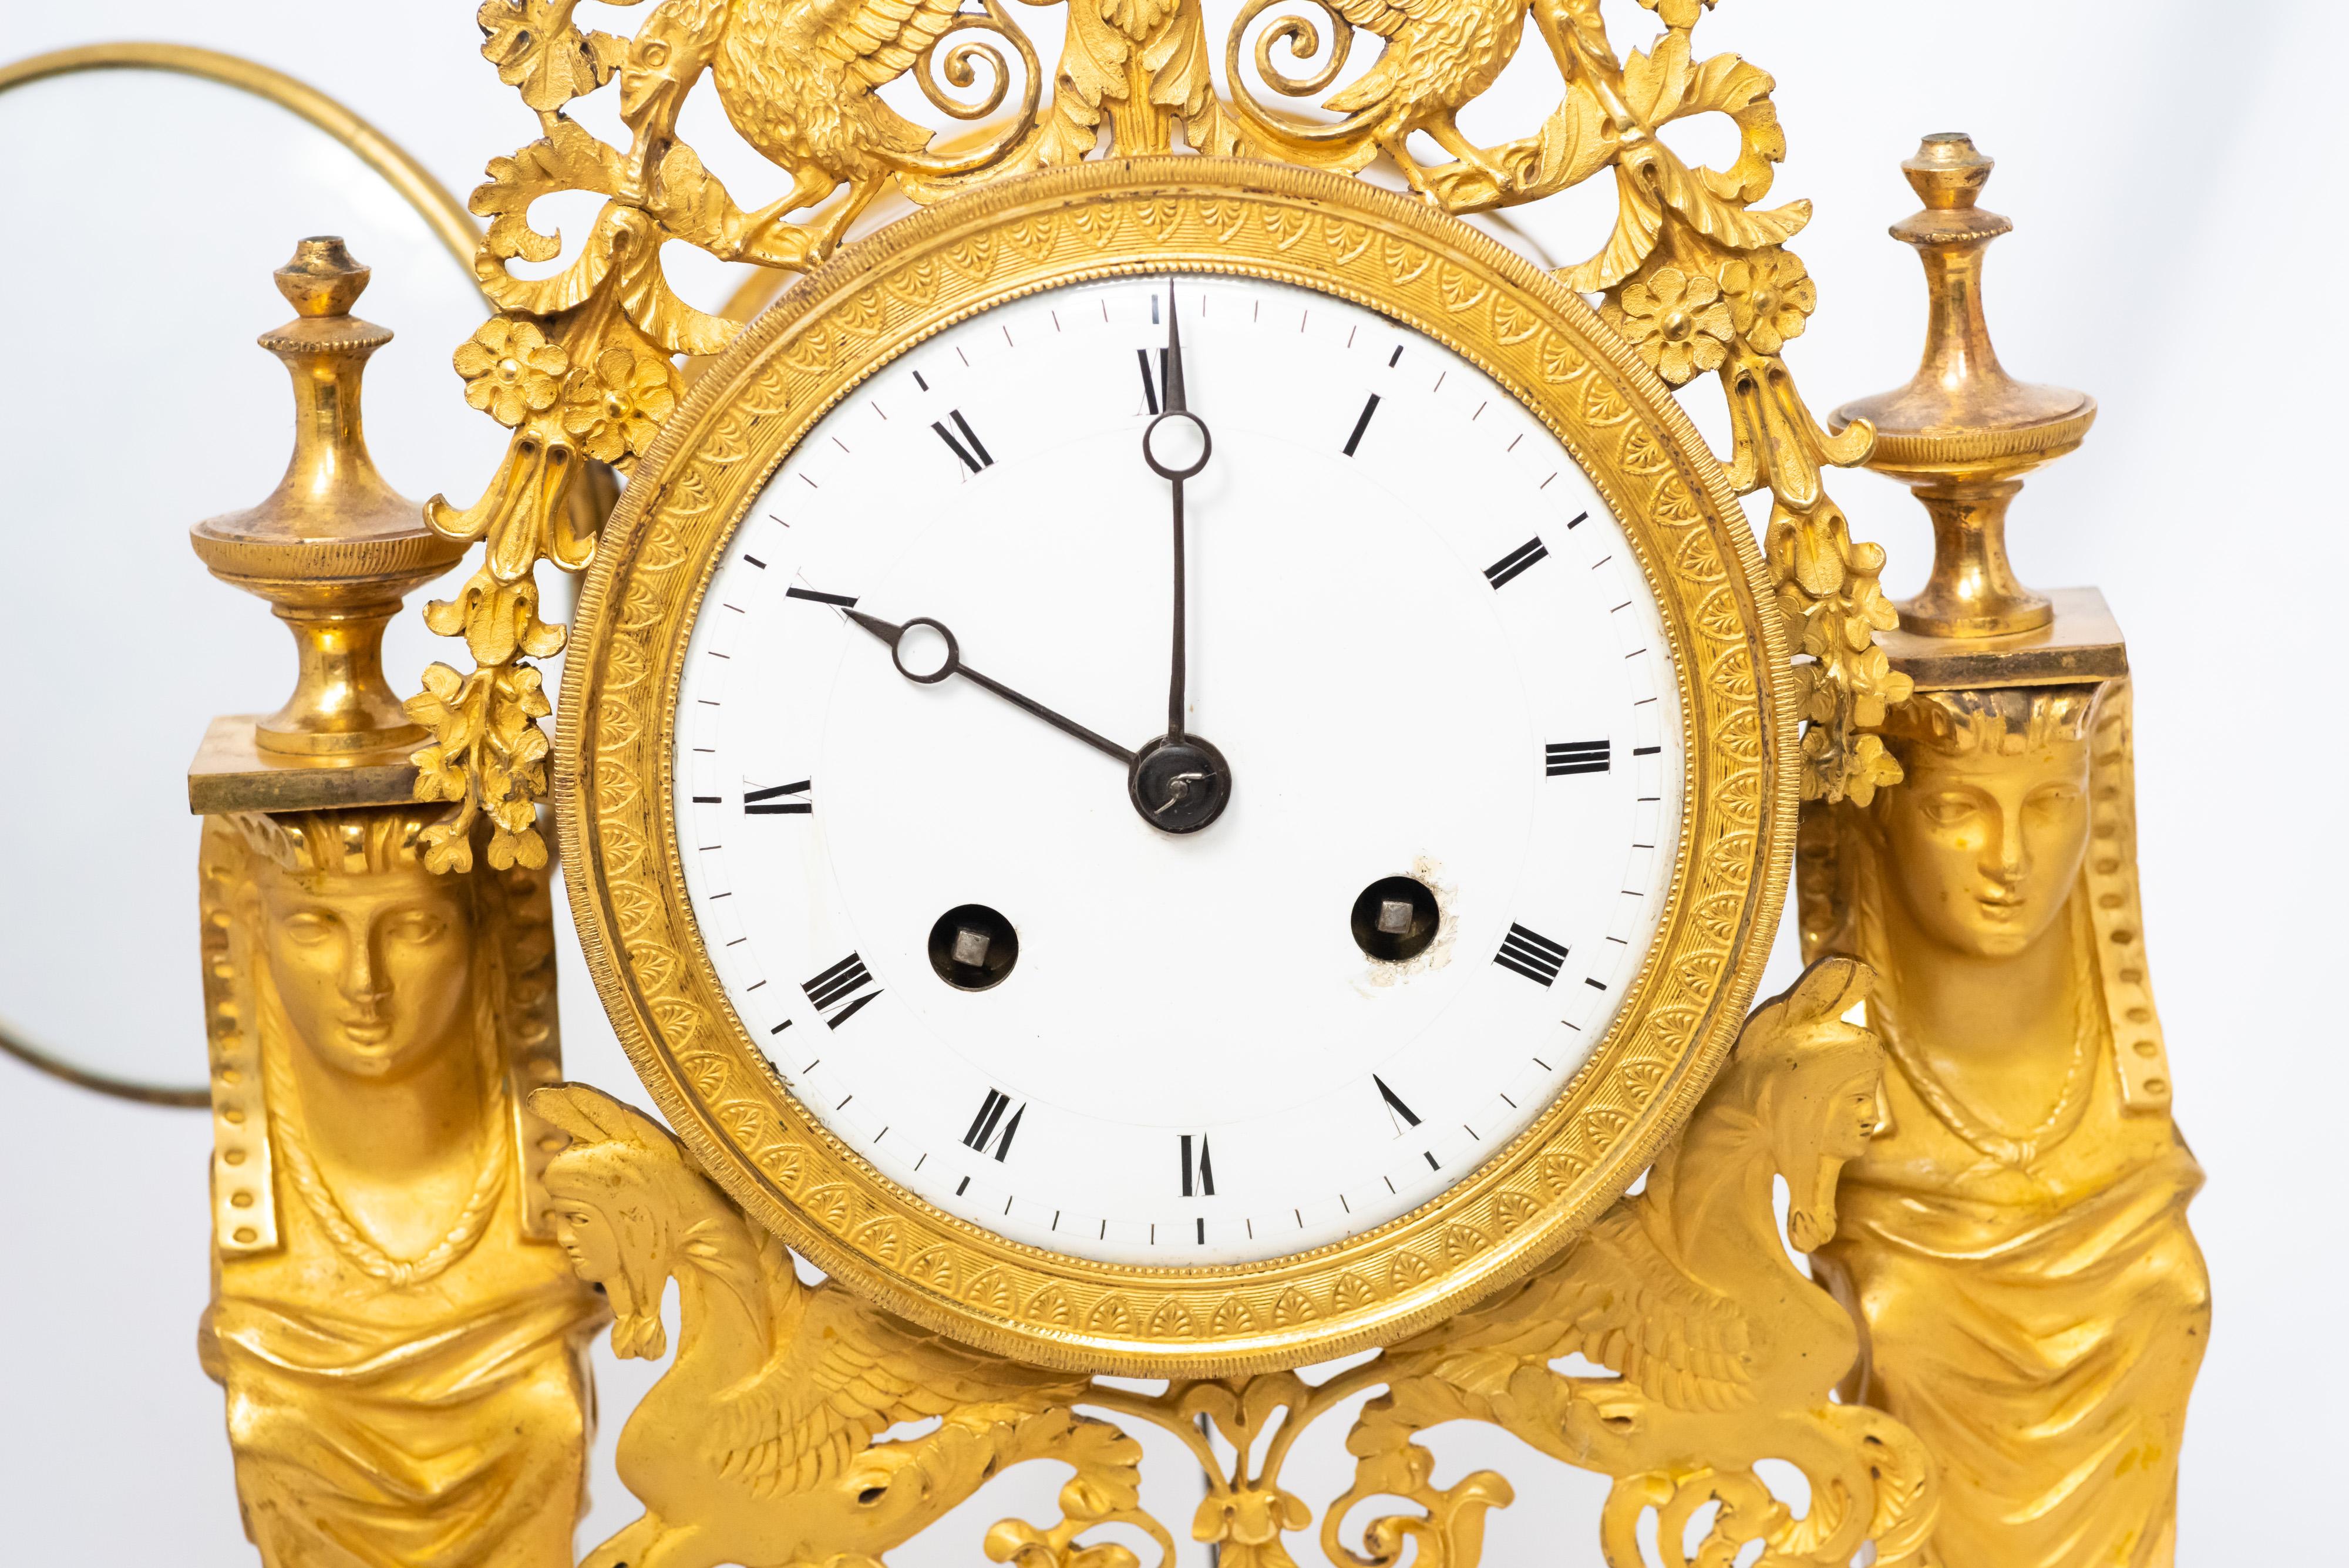 A small, svelte French portico clock from the Directory Era, 1795-99. In the 